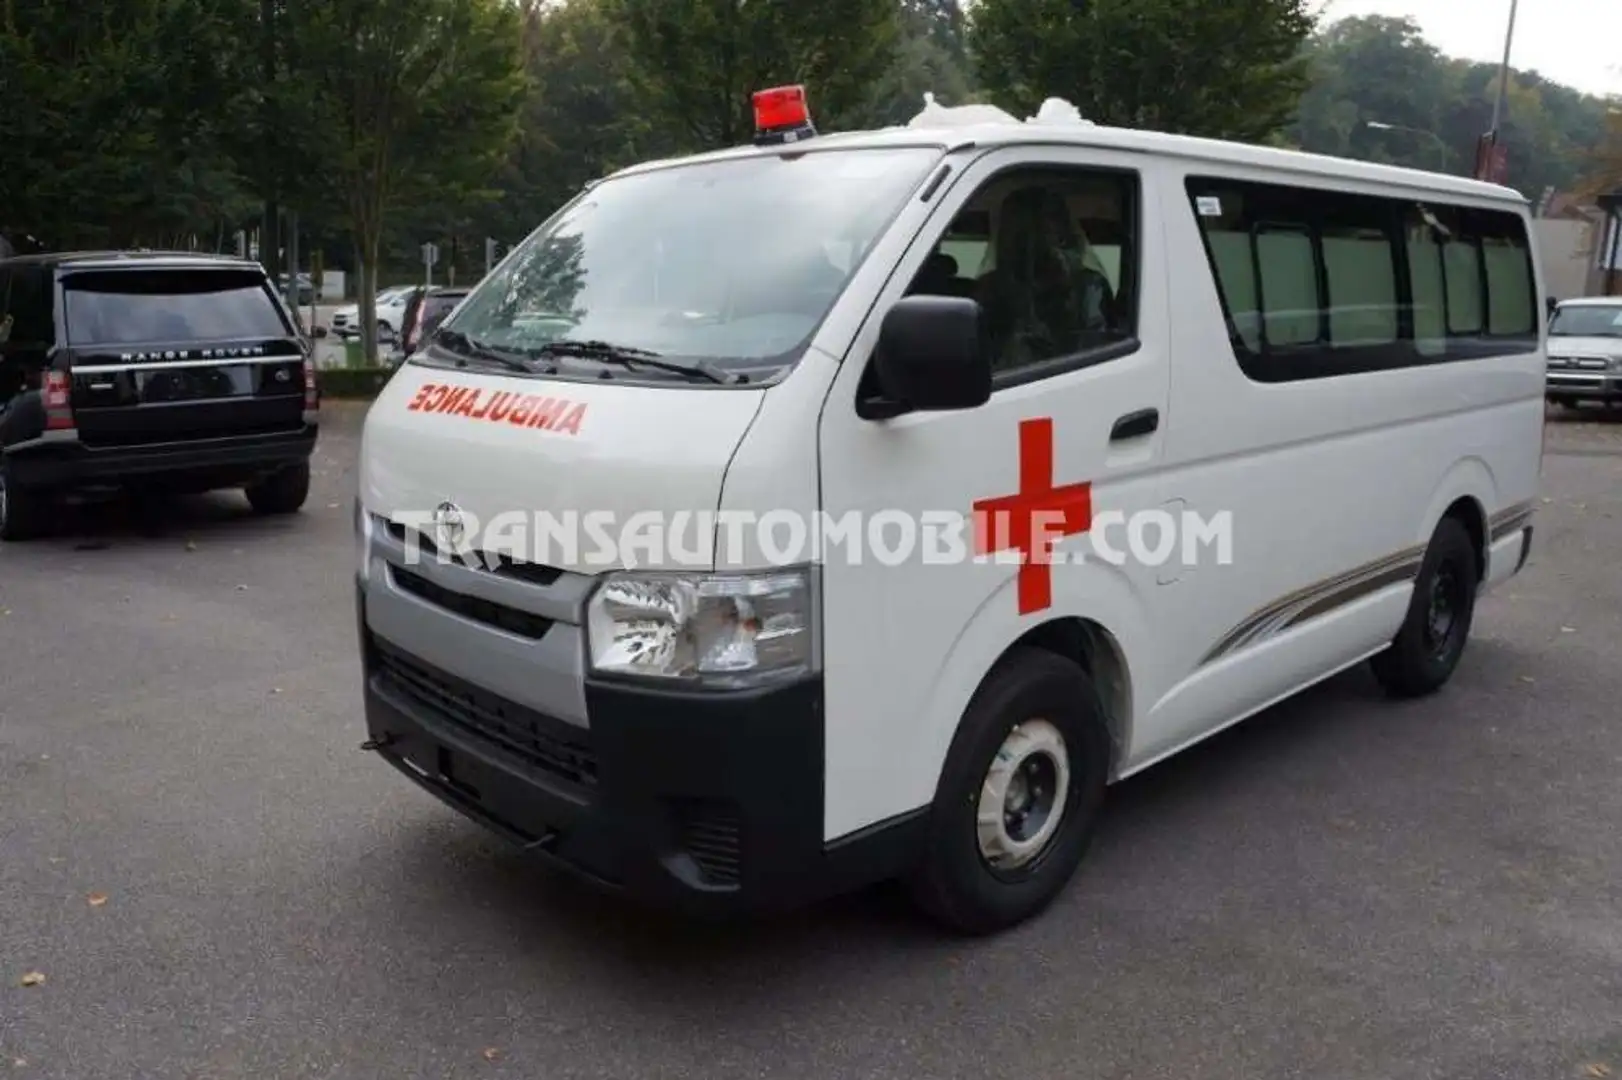 Toyota Hiace STANDARD ROOF  - EXPORT OUT EU TROPICAL VERSION - Blanco - 1